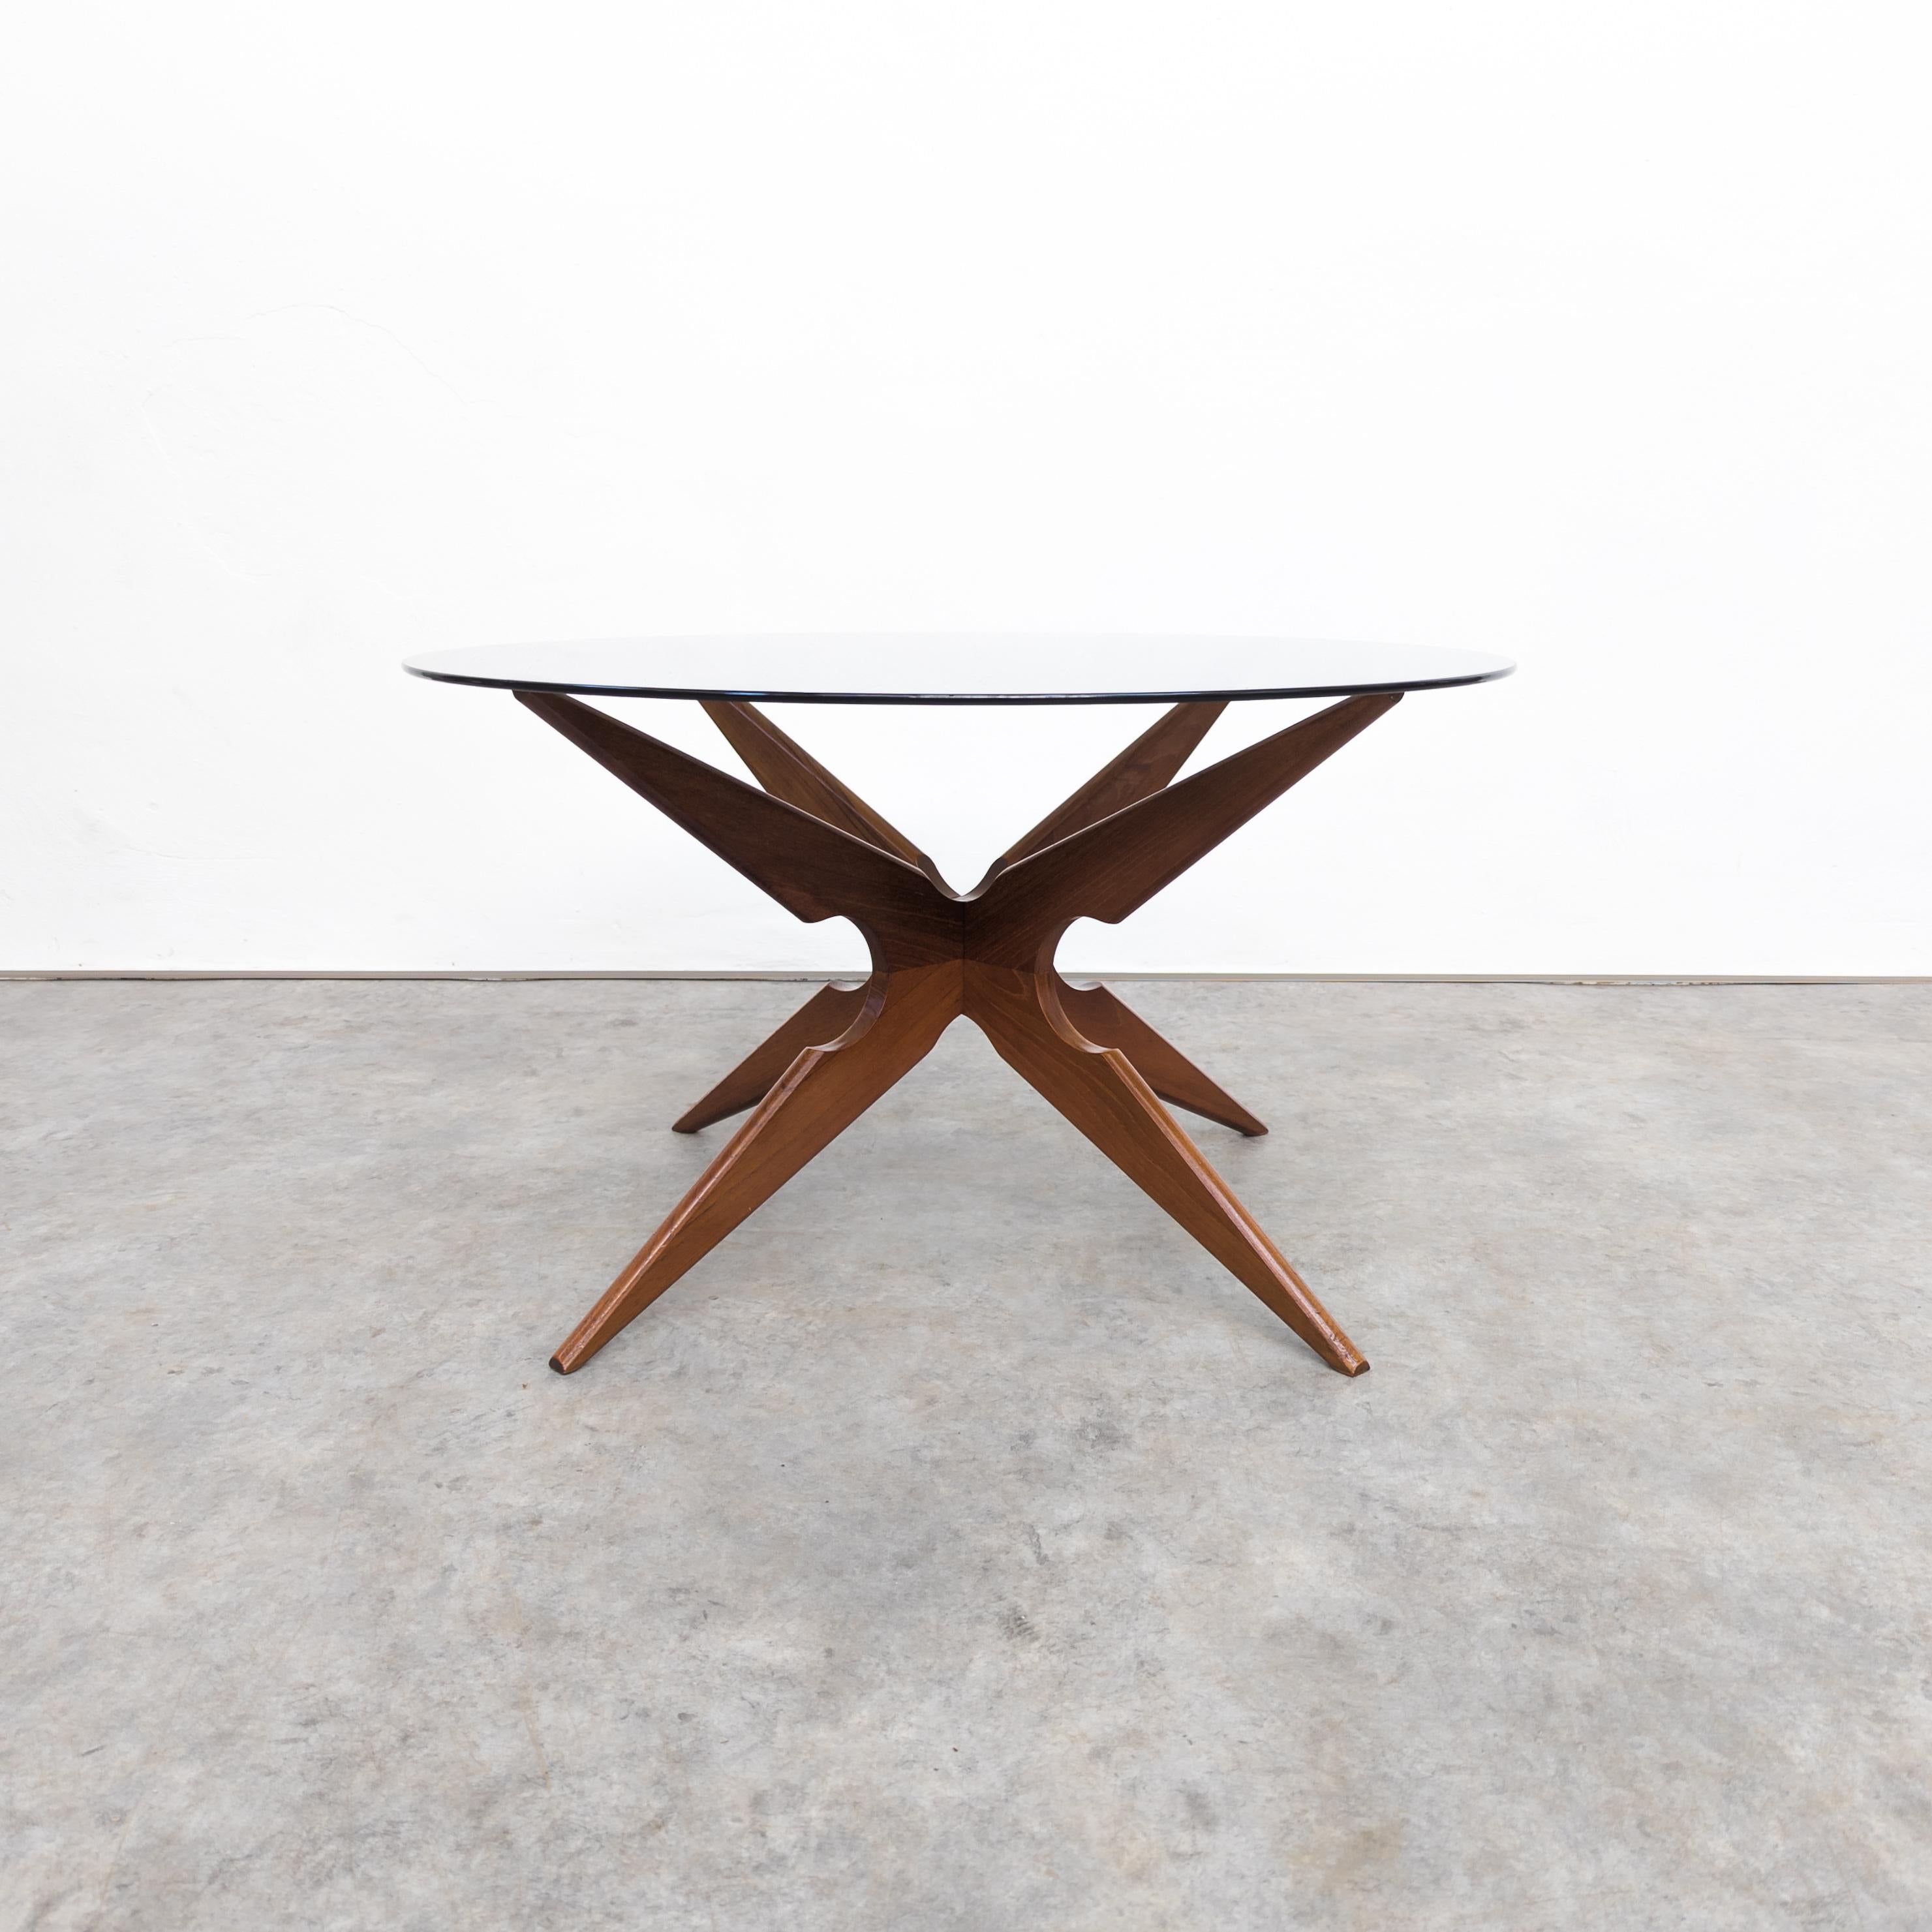 Mid-Century teak and smoked glass spider coffee table by Sika Møbler, Denmark 1960s. Made of two interlocking carved teak elements with 6 mm thick smoked glass. In very good vintage condition with only minor traces of wear on the glass surface. Teak